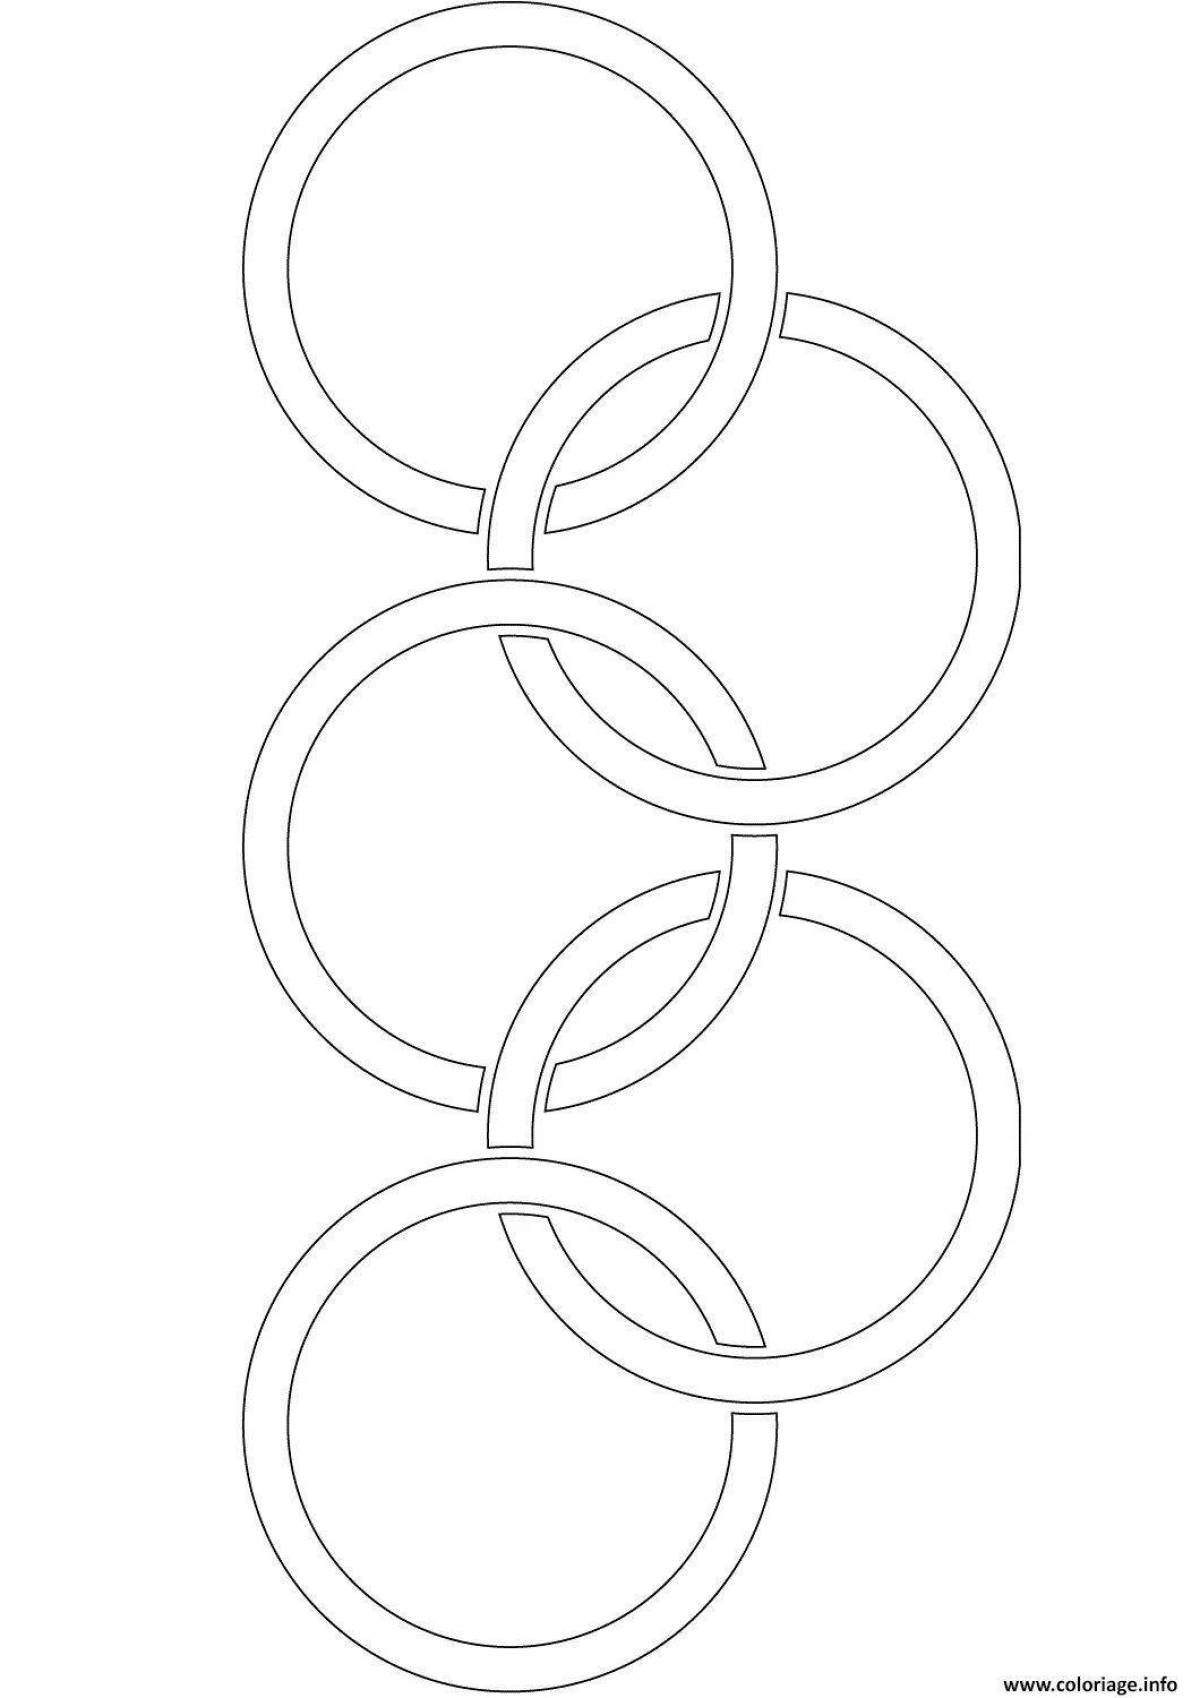 Printable shining olympic rings coloring page